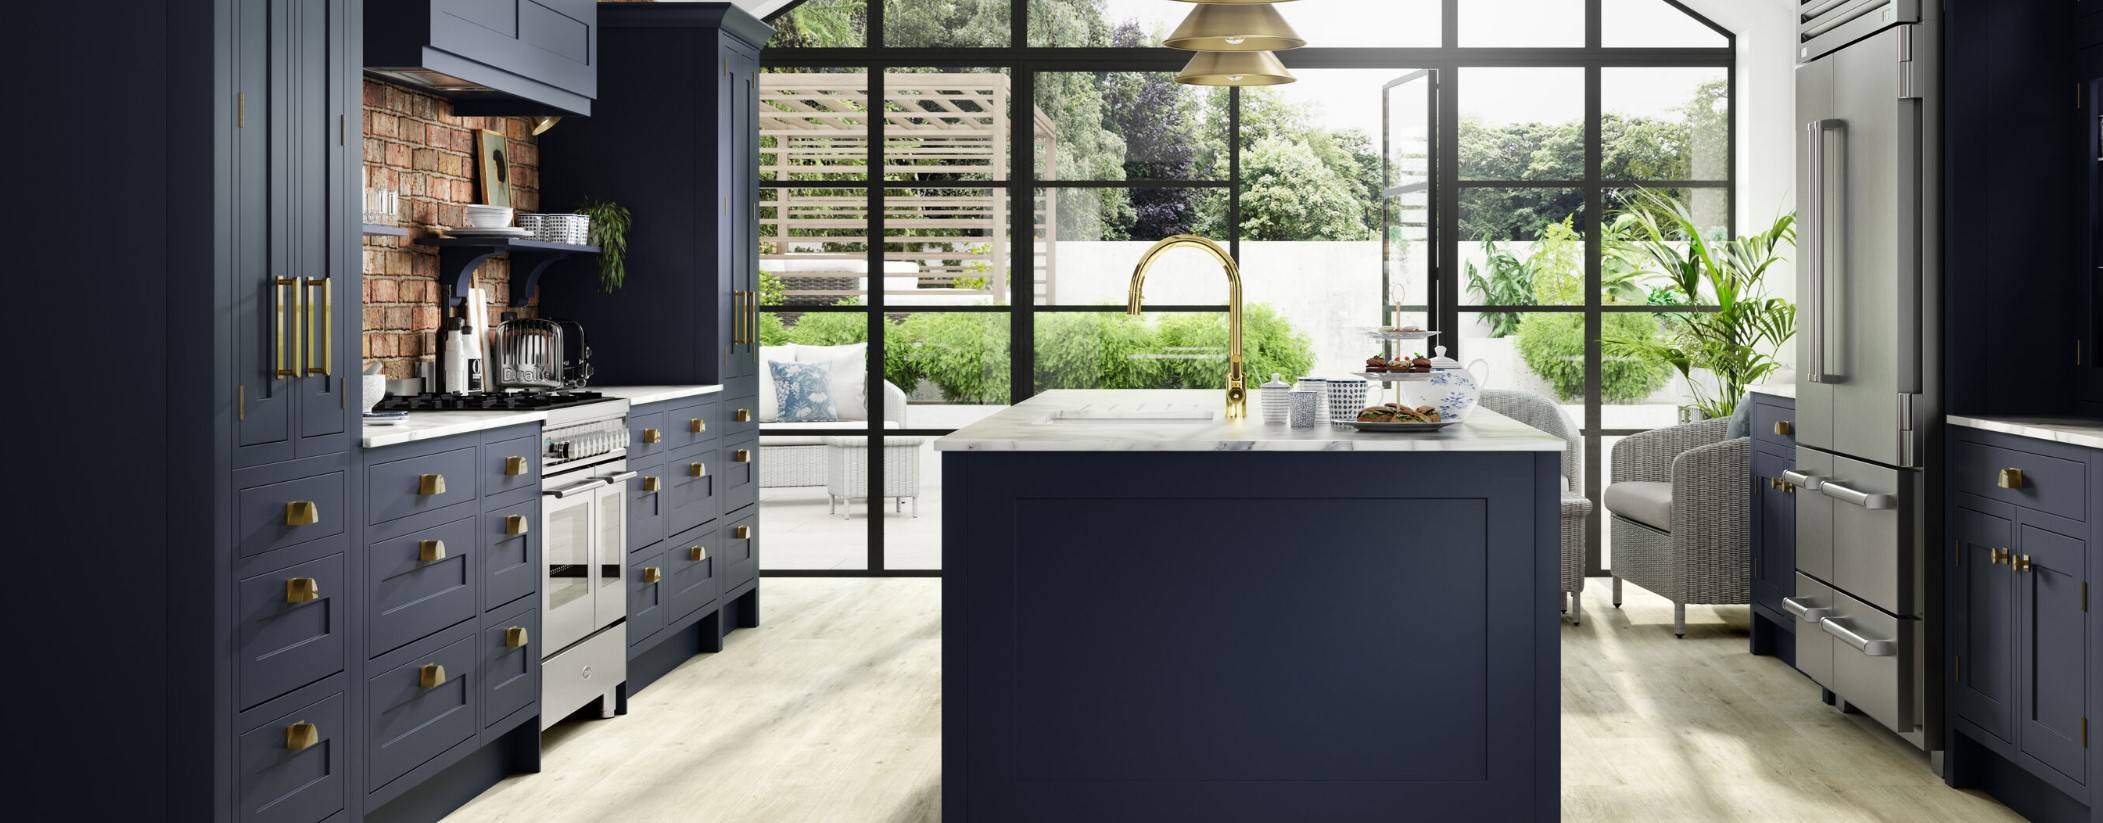 Aberford | Kitchens by Emma Reed